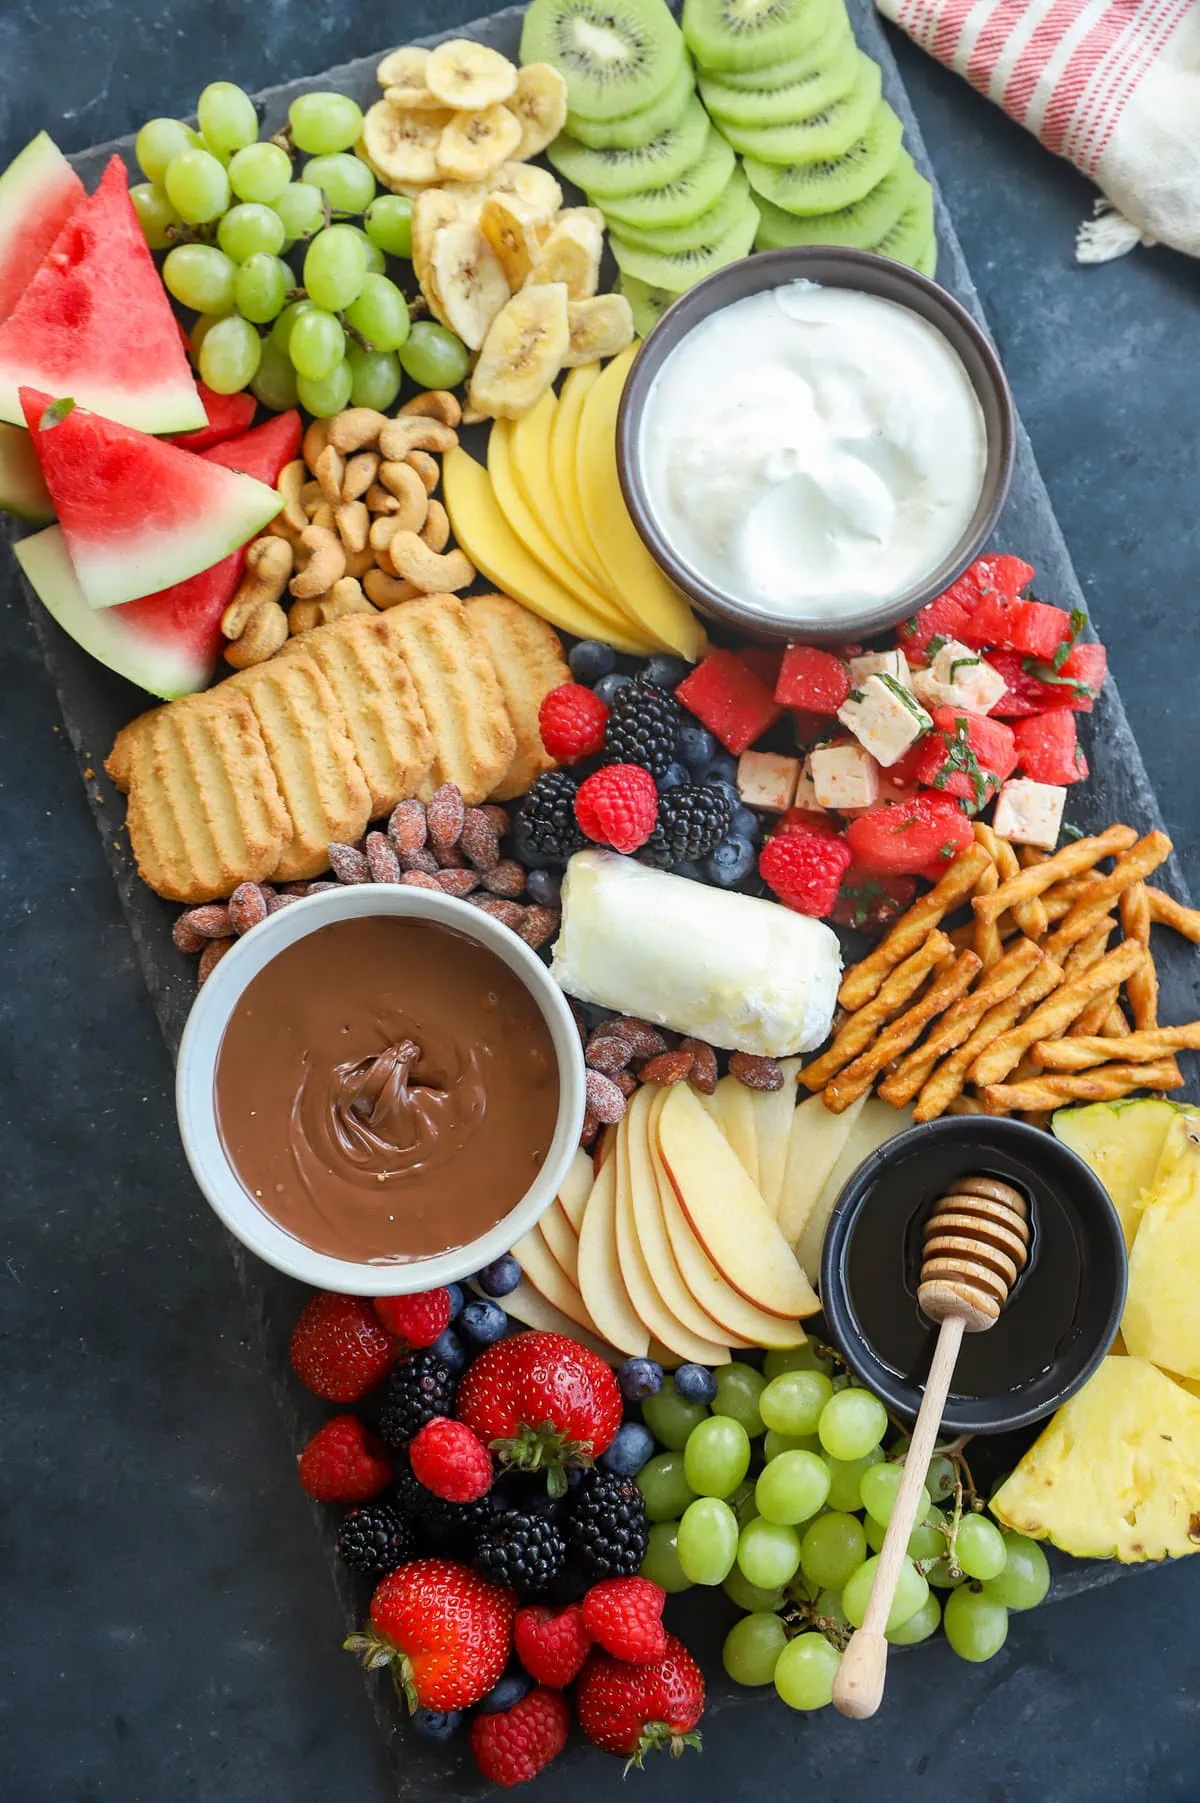 A colorful array of fresh fruits, nuts, and dips arranged on a dark surface for snacking.